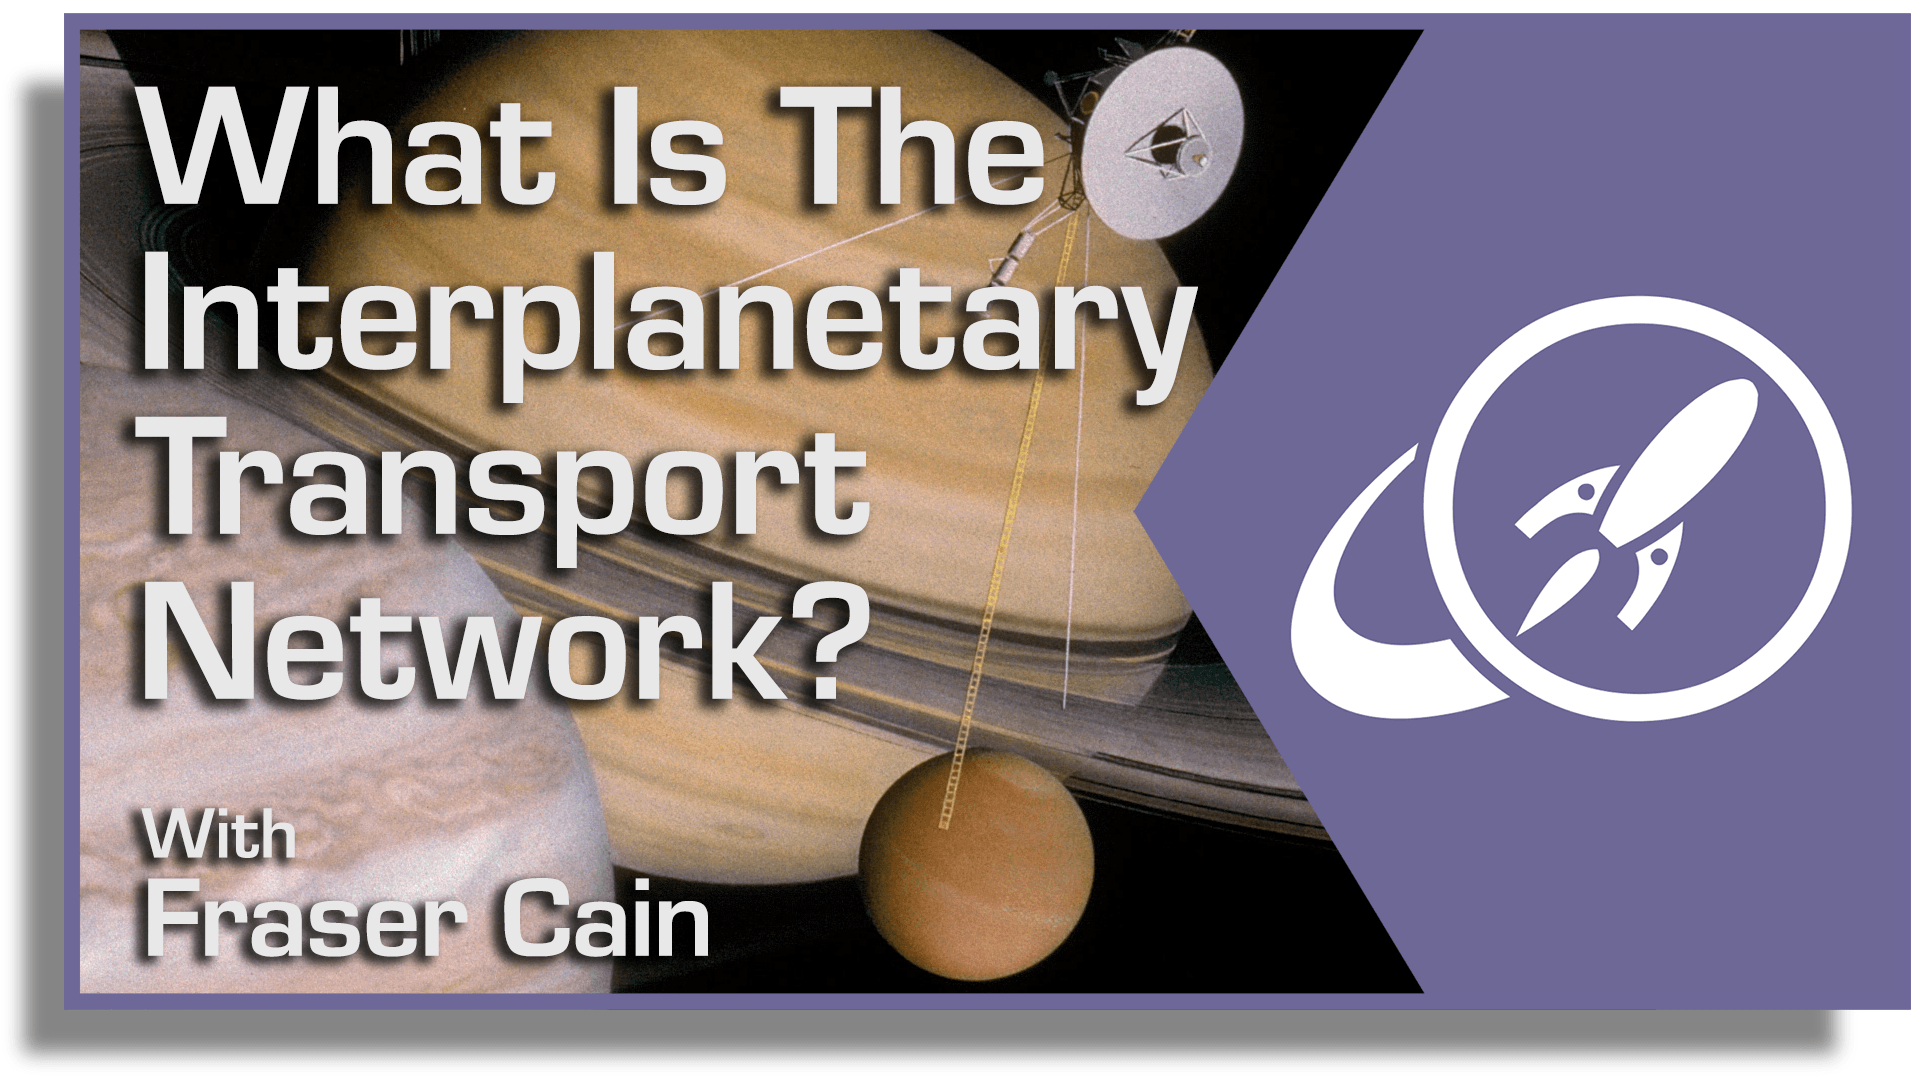 What is the Interplanetary Transport Network?